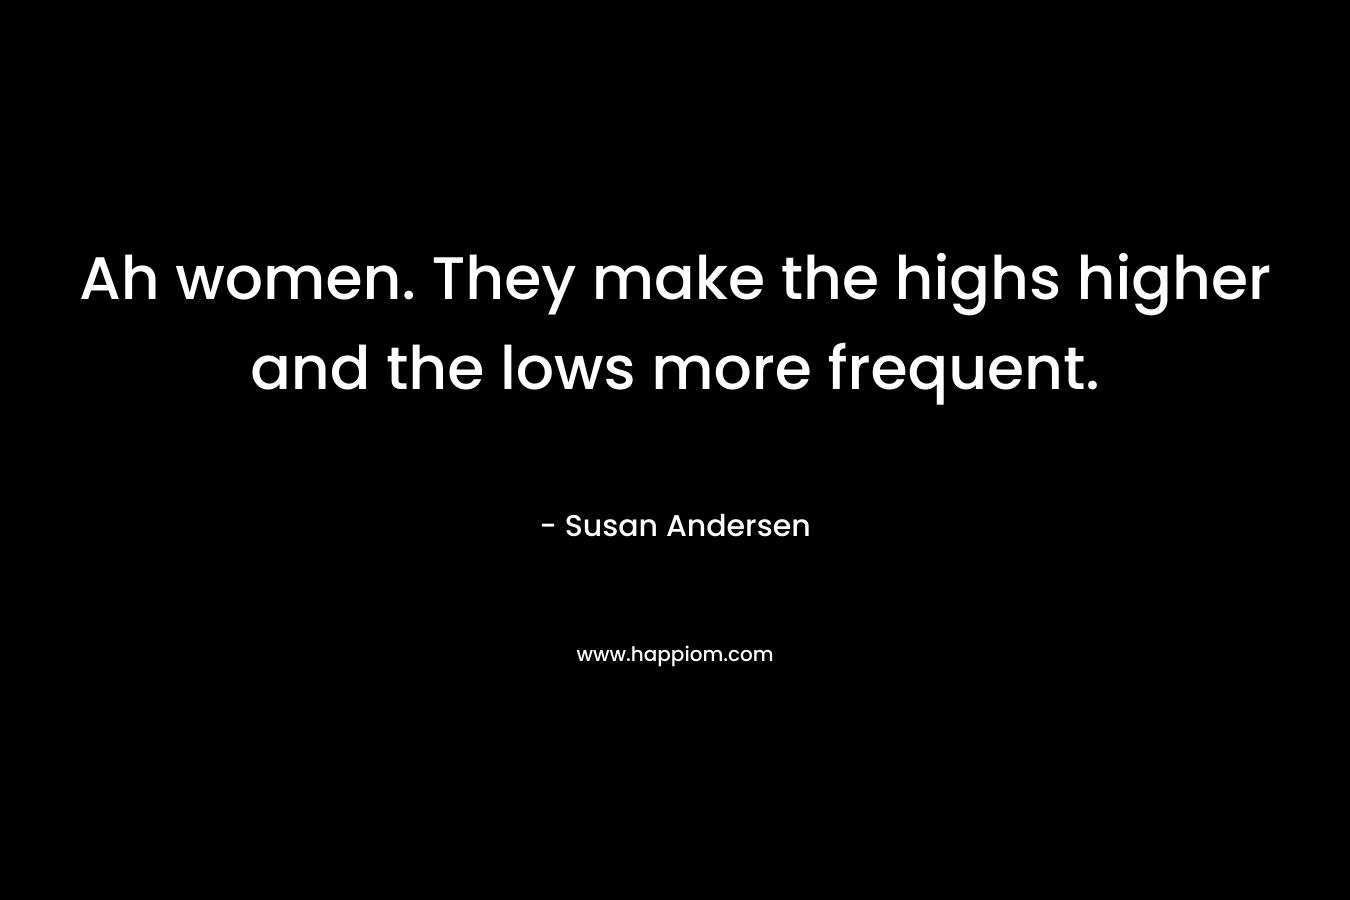 Ah women. They make the highs higher and the lows more frequent. – Susan Andersen